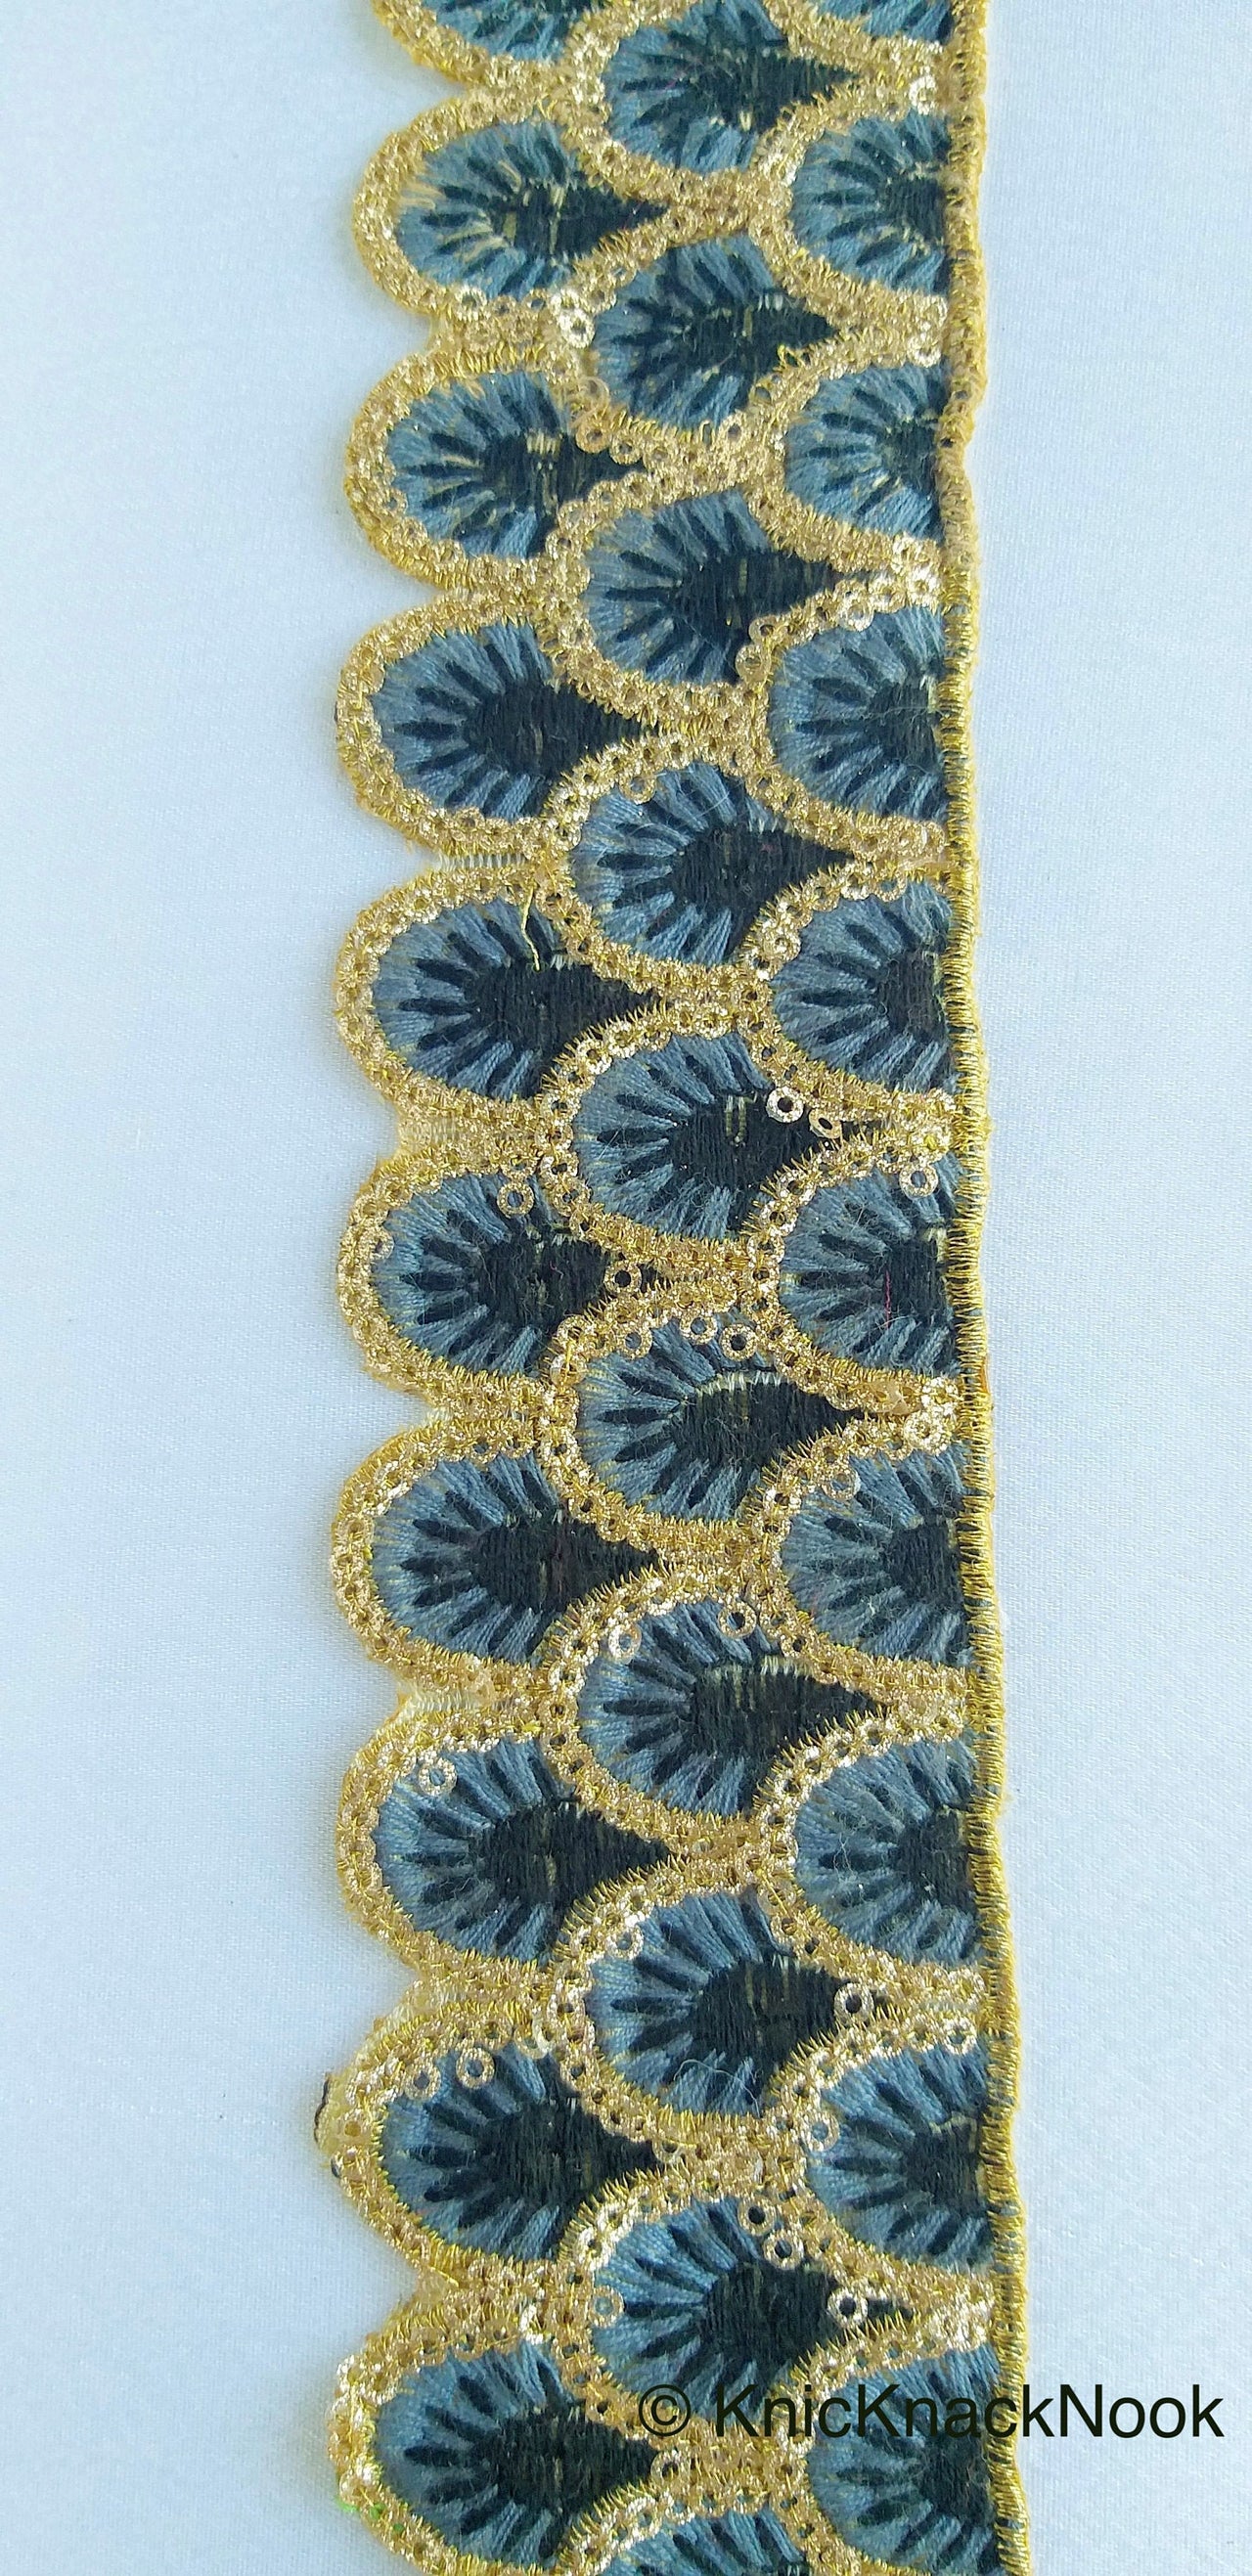 Trims: Grey, Black And Gold Embroidered Scallop Lace Trim, Approx. 50mm wide - 210119L311